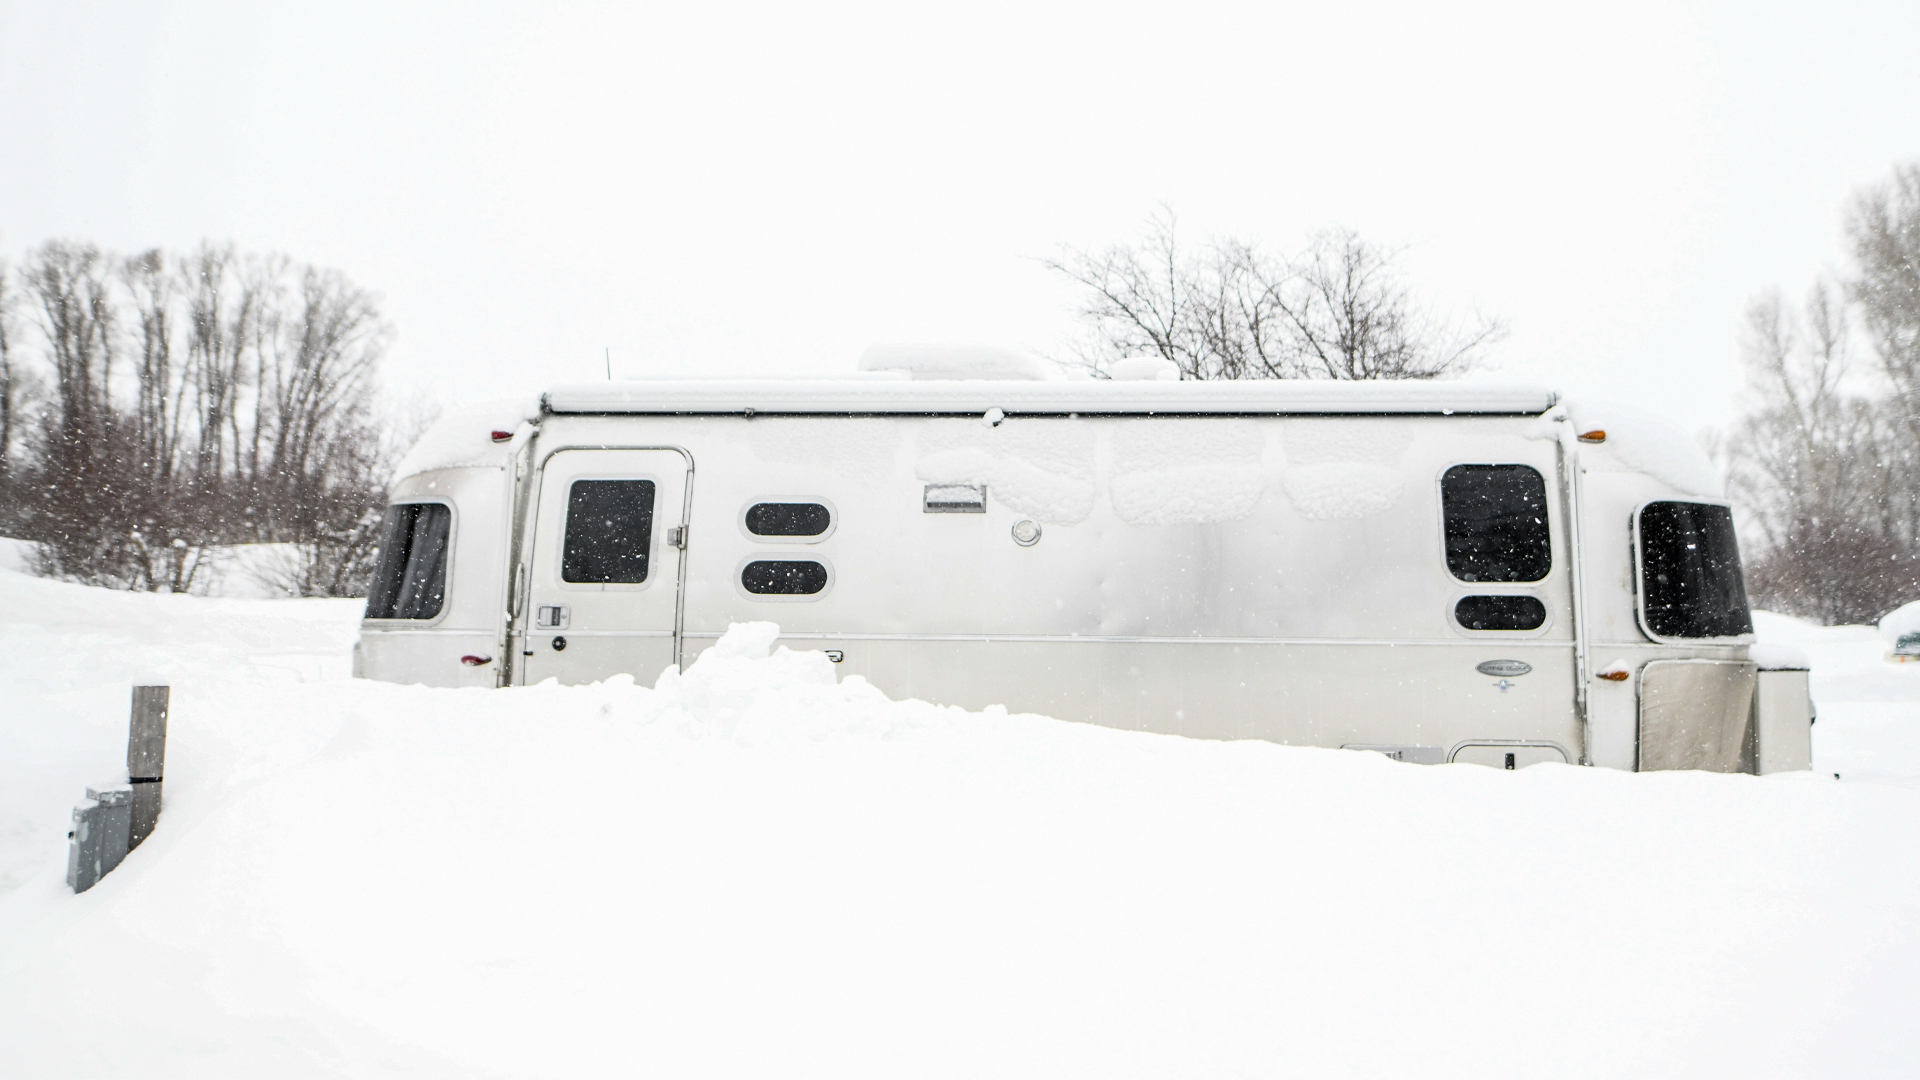 Airstream Travel trailer camping in the winter